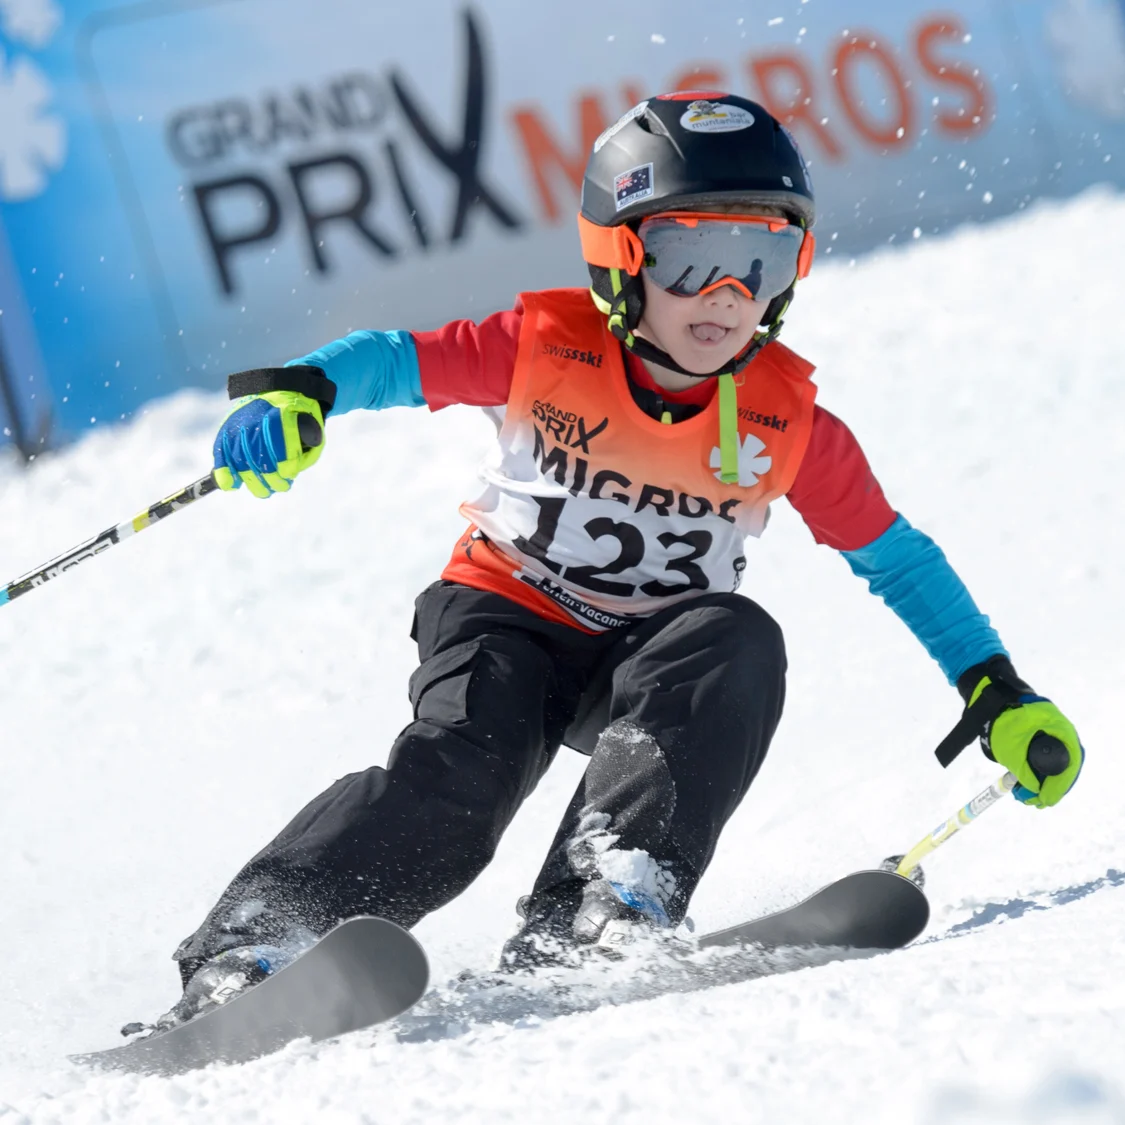 A child takes part in a downhill run at the Migros Grand Prix.